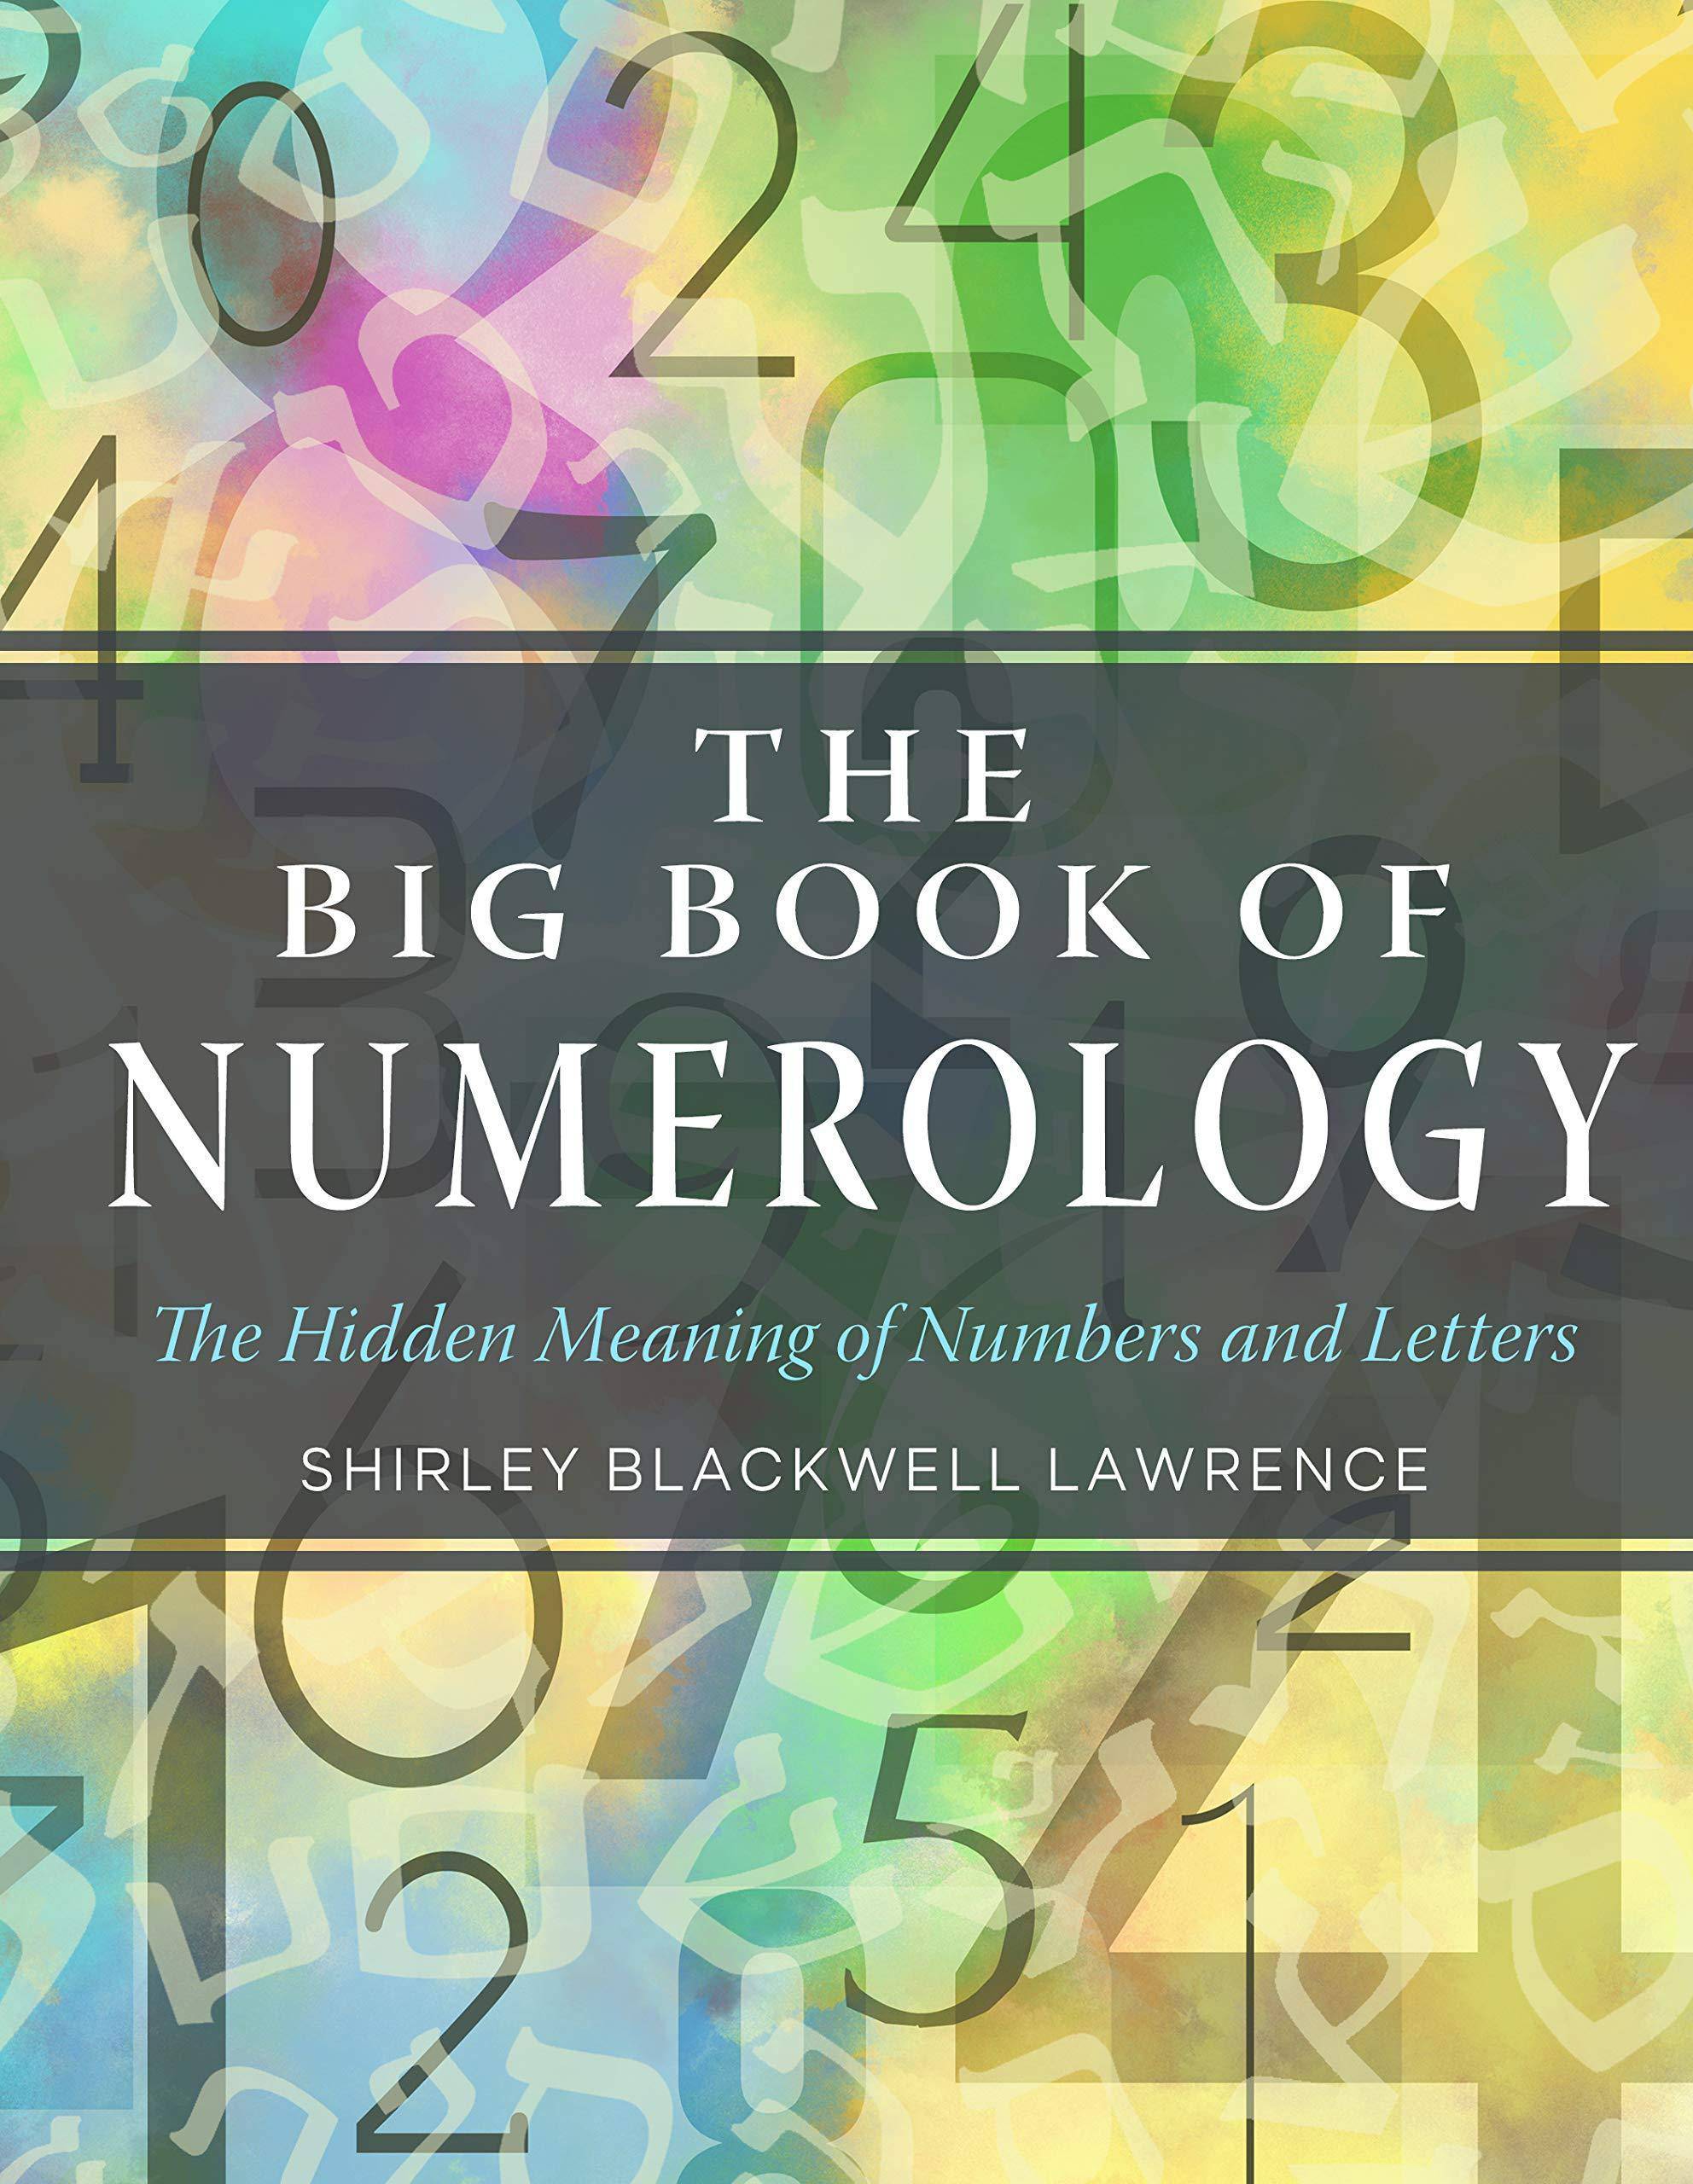 Big Book of Numerology: The Hidden Meaning of Numbers and Letter - SureShot Books Publishing LLC